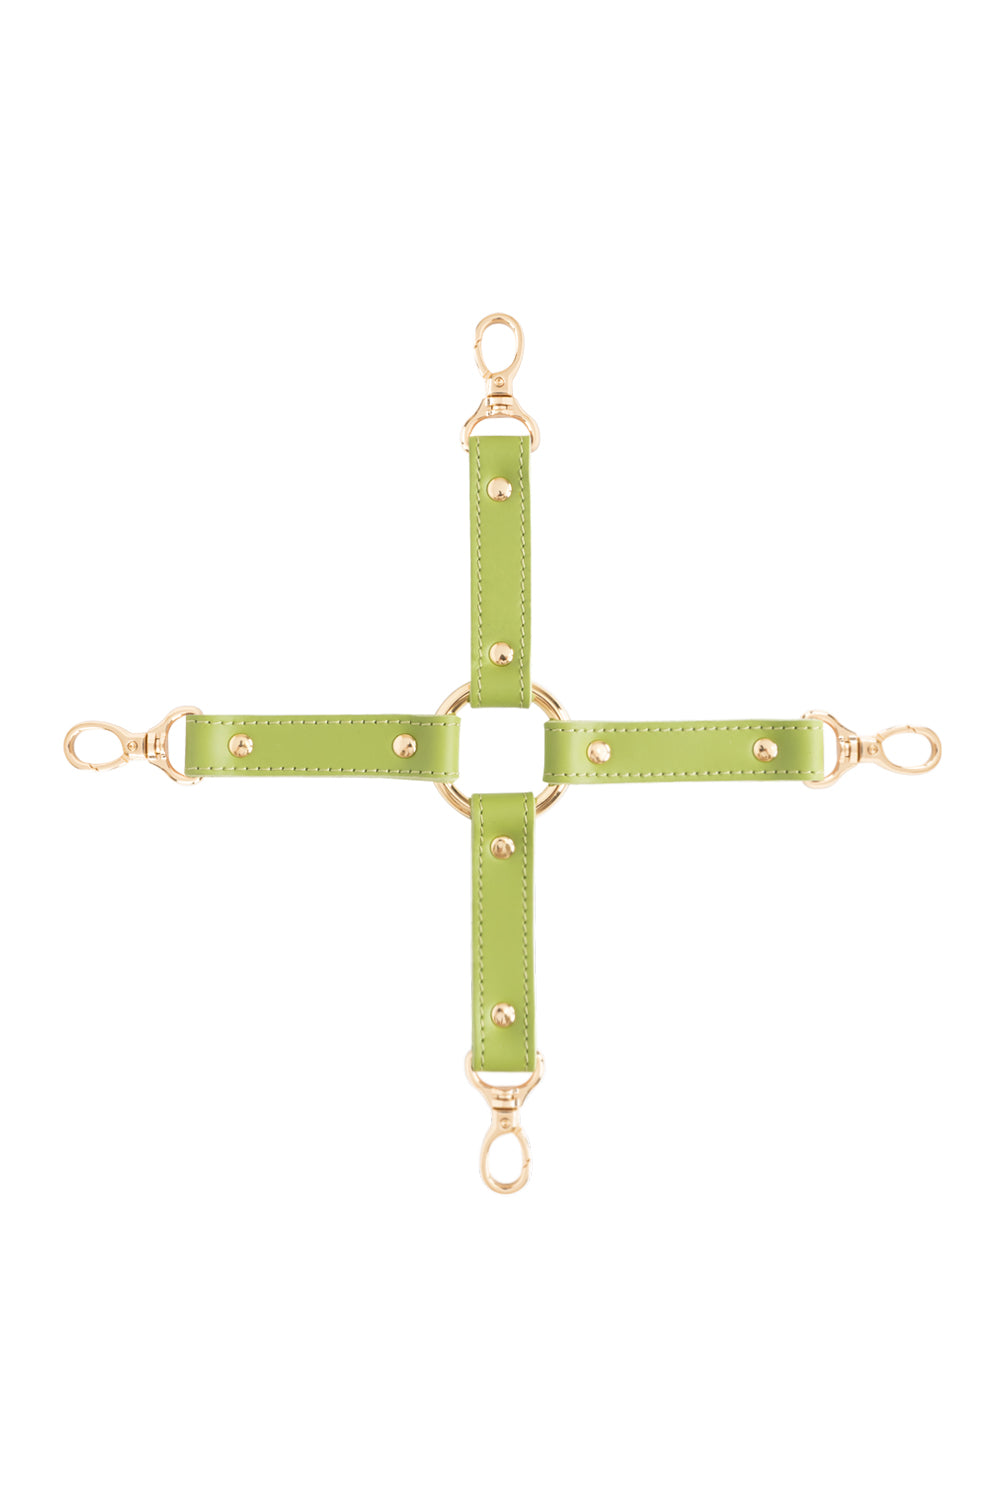 4-way Cross Strap Connector with a ring